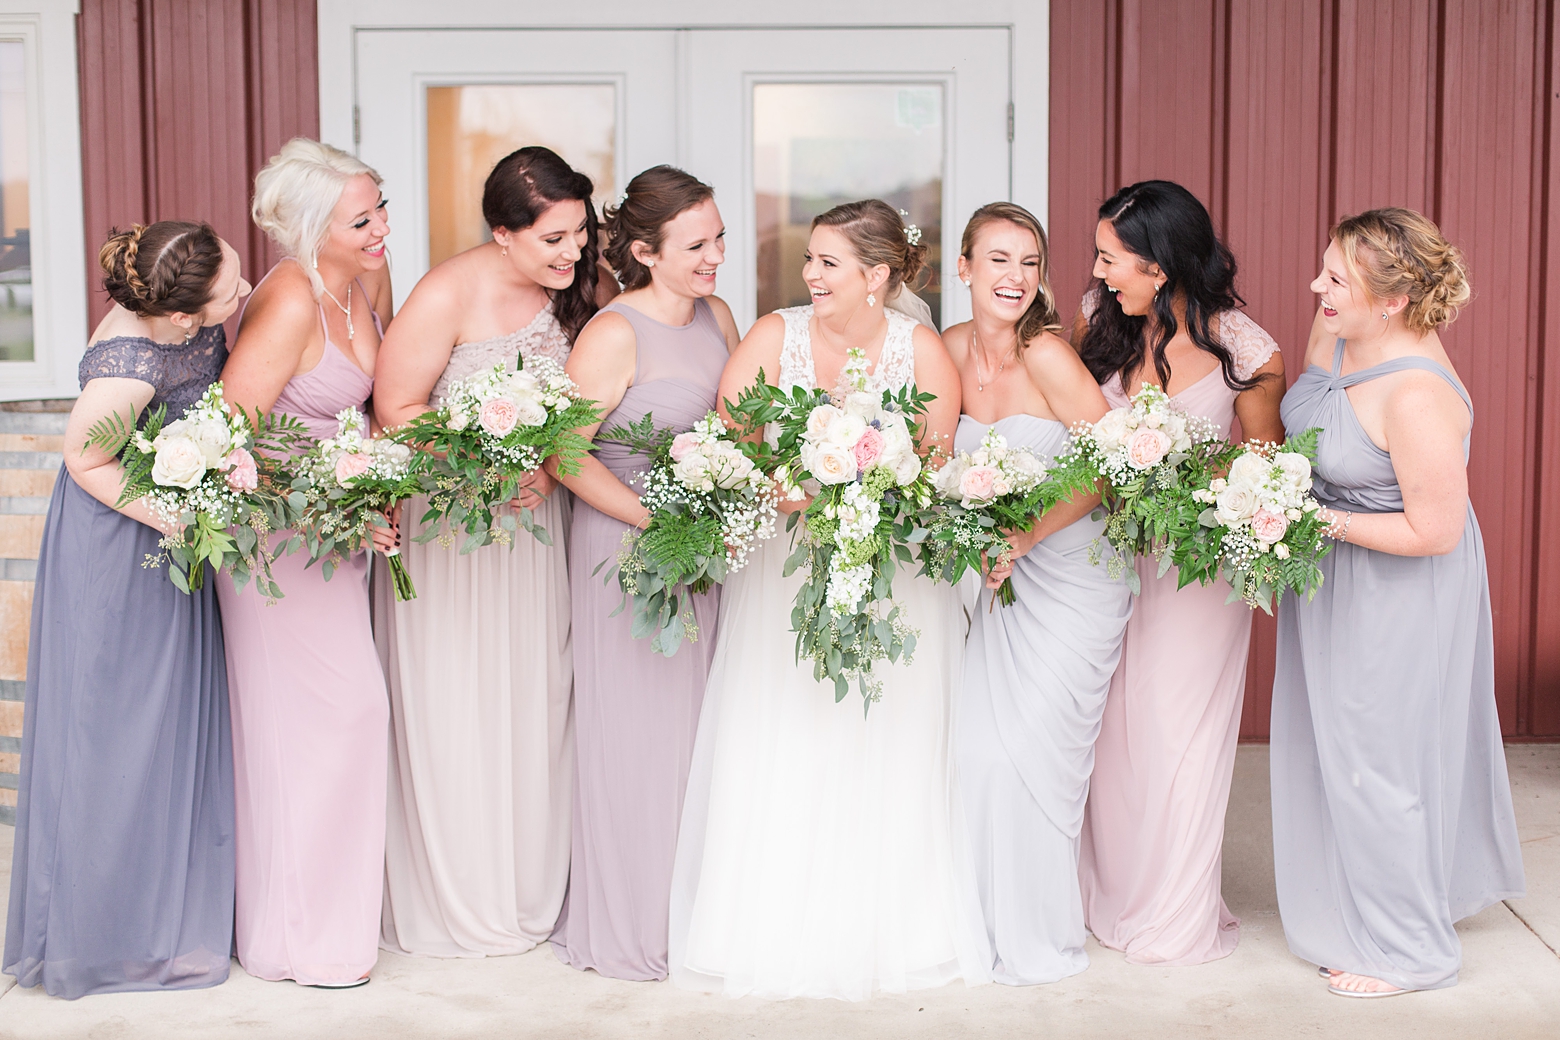 Virginia Wedding Bouquet Inspiration by Angie McPherson Photography 